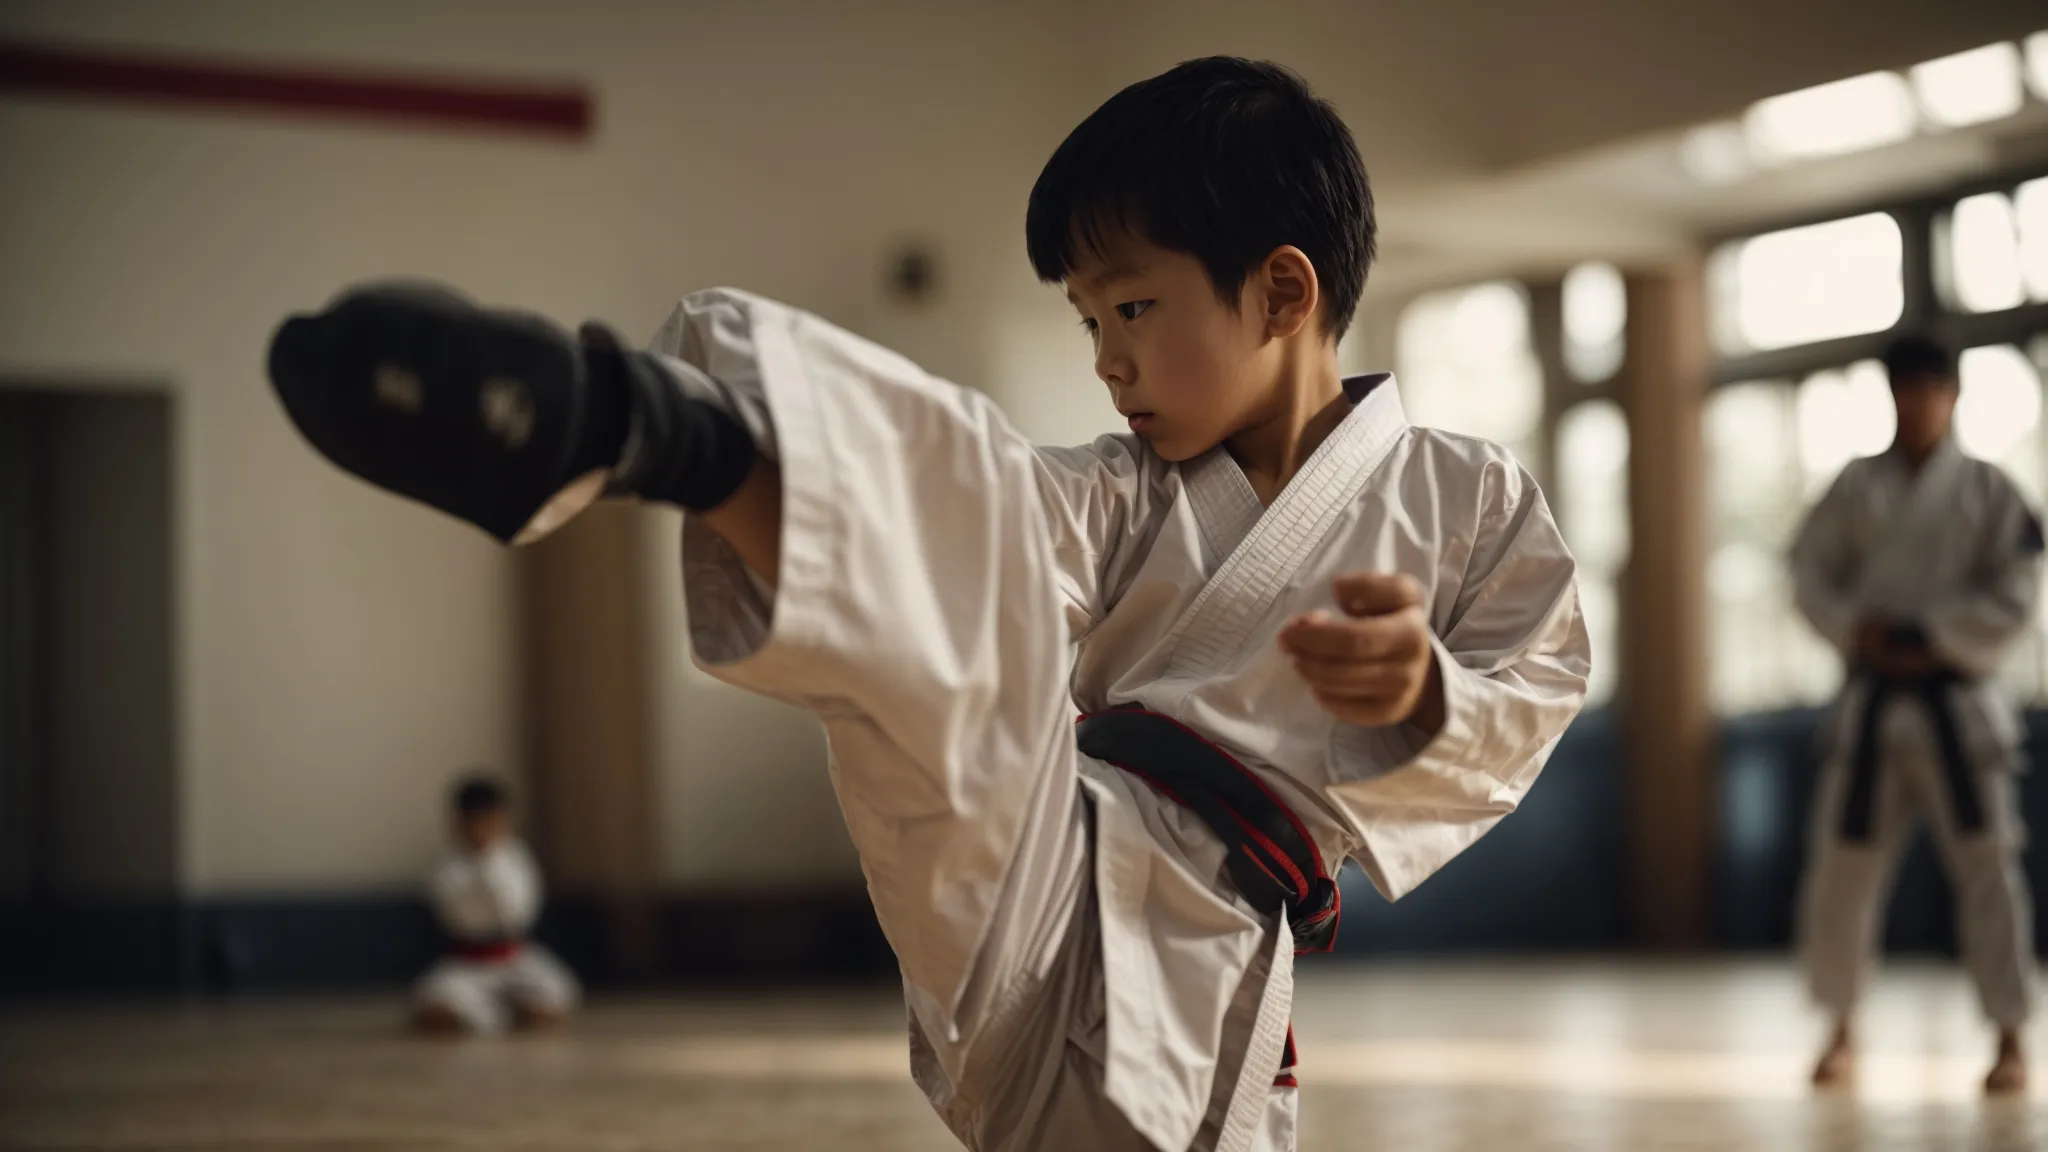 a child in a martial arts uniform executes a precise kick, their focused expression mirroring the concentration and control being refined within.